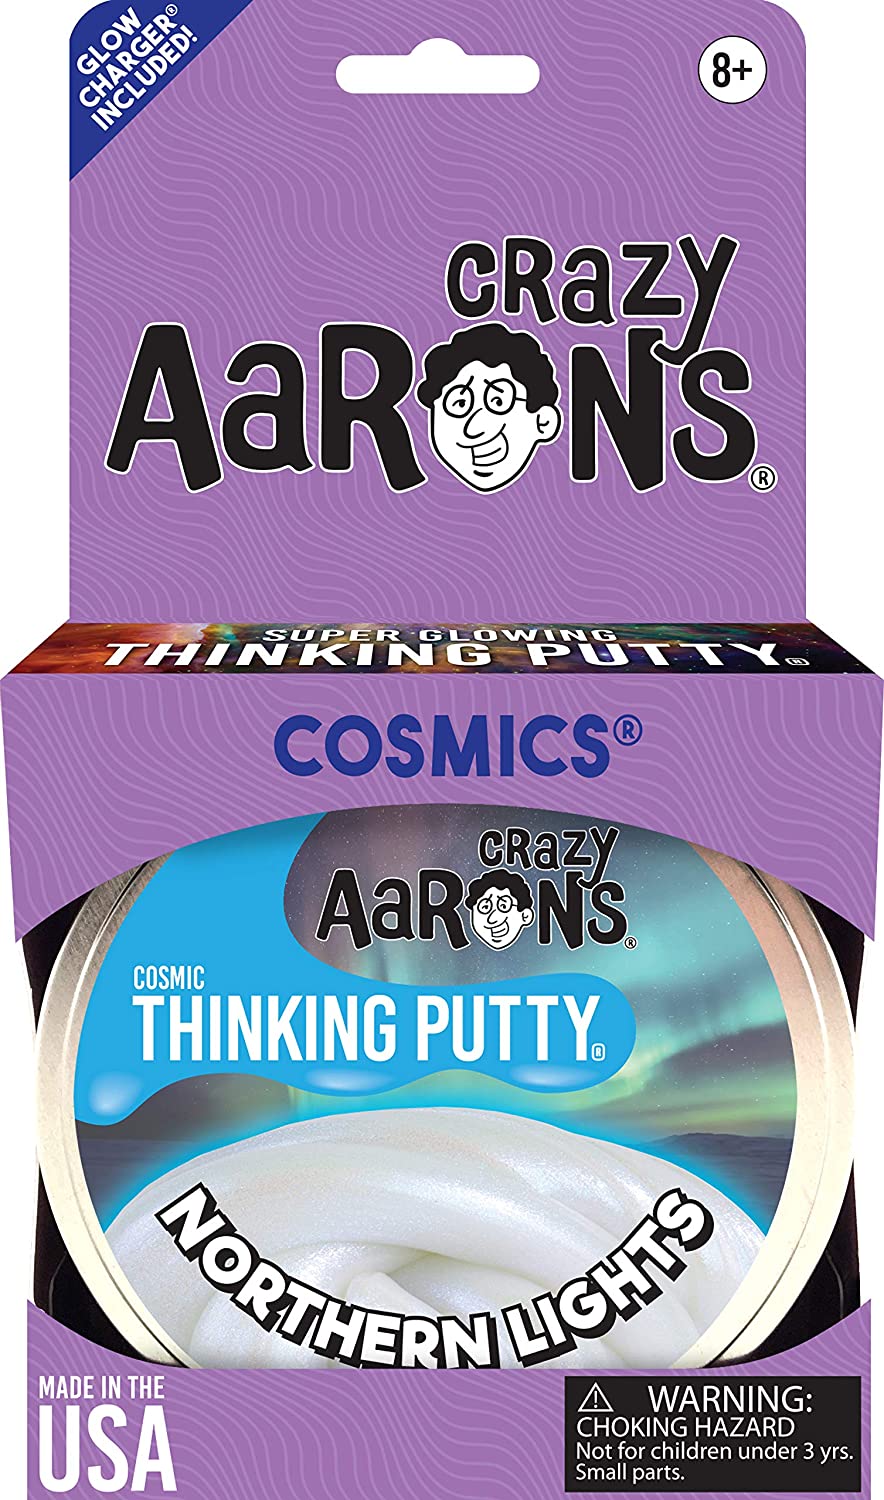 Crazy Aaron's Cosmic Thinking Putty - Northern Lights